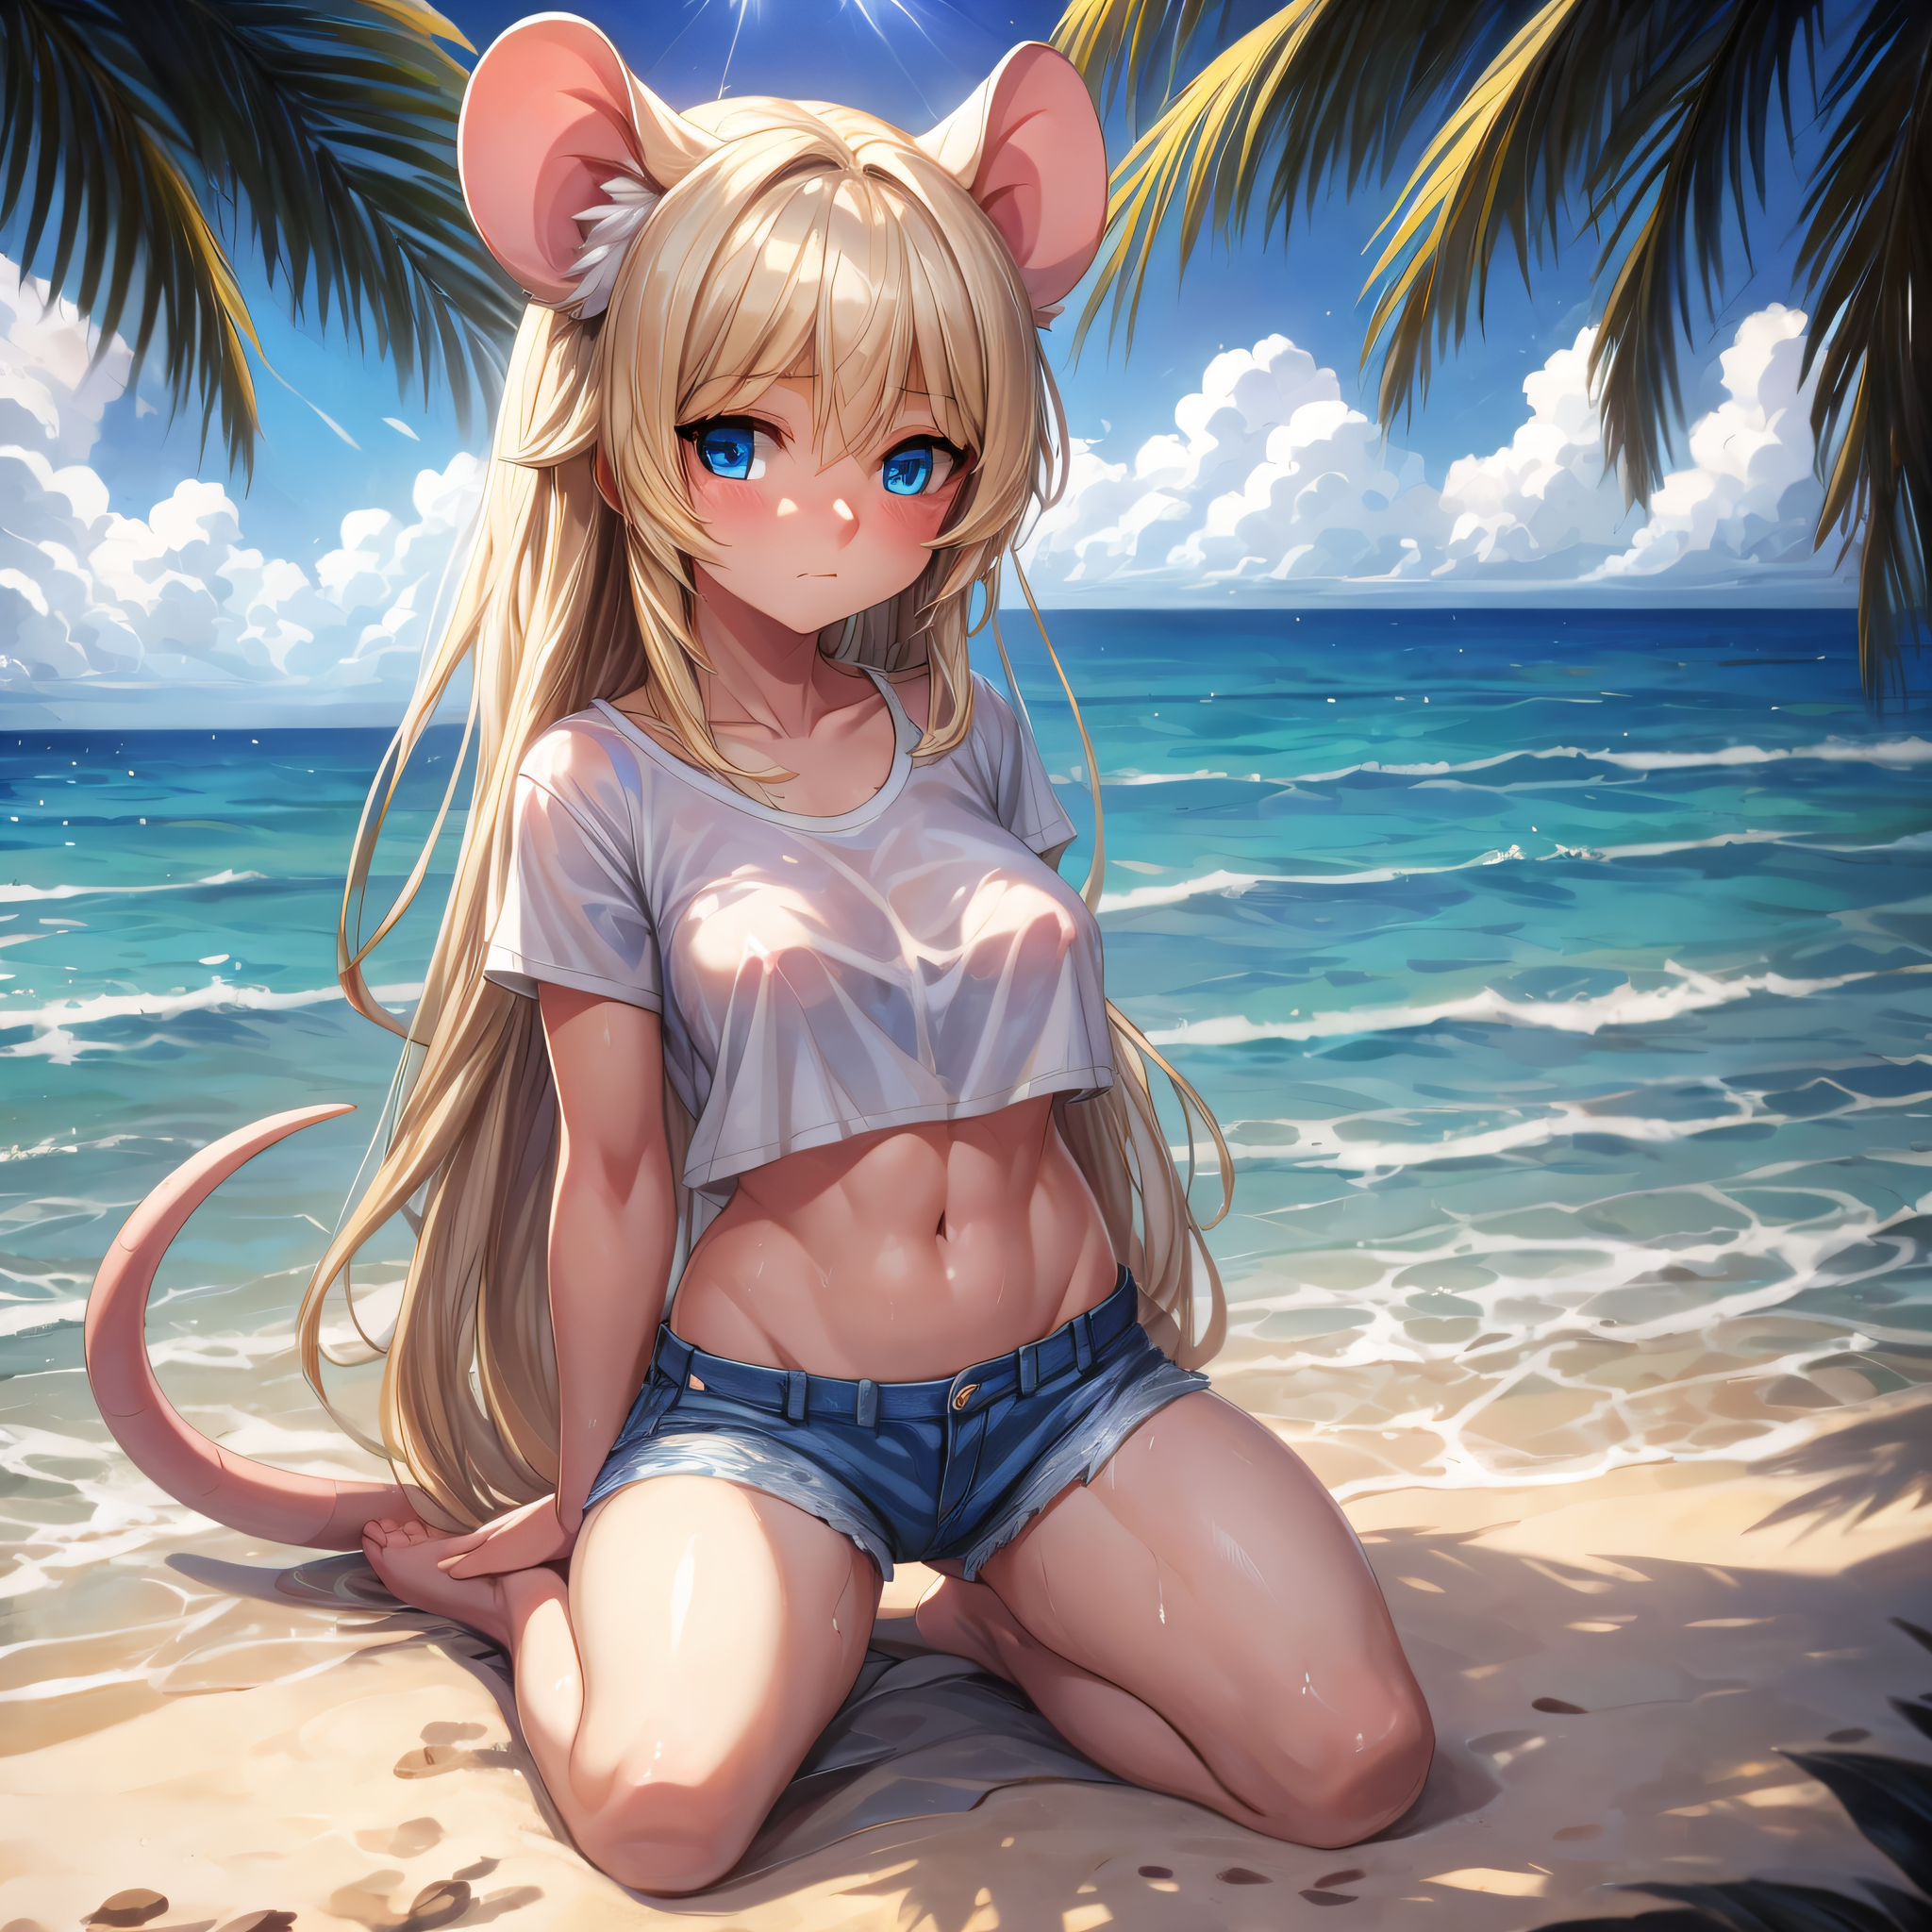 Submissive,Anime,Size Difference,Roleplay,Female,Cute,Scenario,After a Plane Crash, Zumi has ended up stranded on a desert island with no one to talk to, or be with. She has struggled to survive but overtime has taught herself how to live alone on this island. 